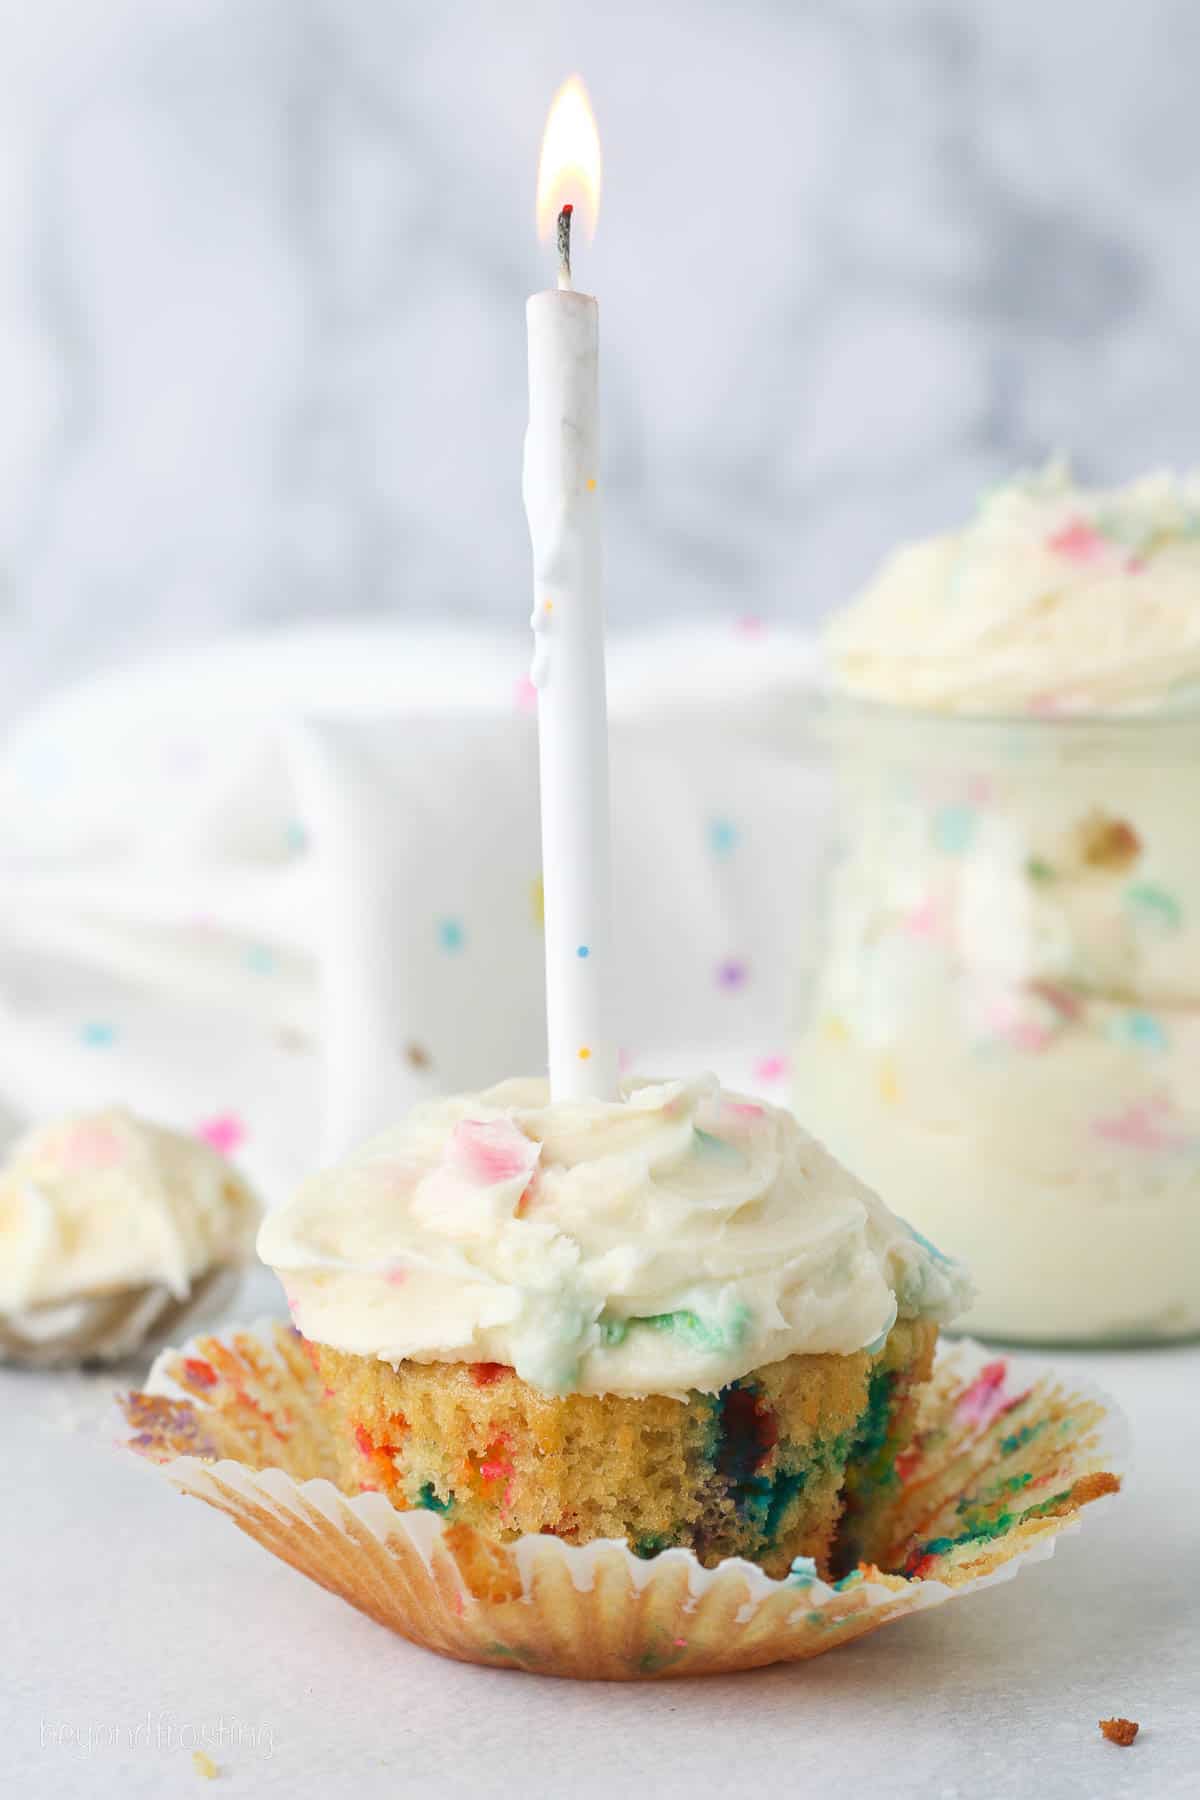 A partially unwrapped funfetti cupcake frosted with rainbow chip frosting and topped with a lit birthday candle.